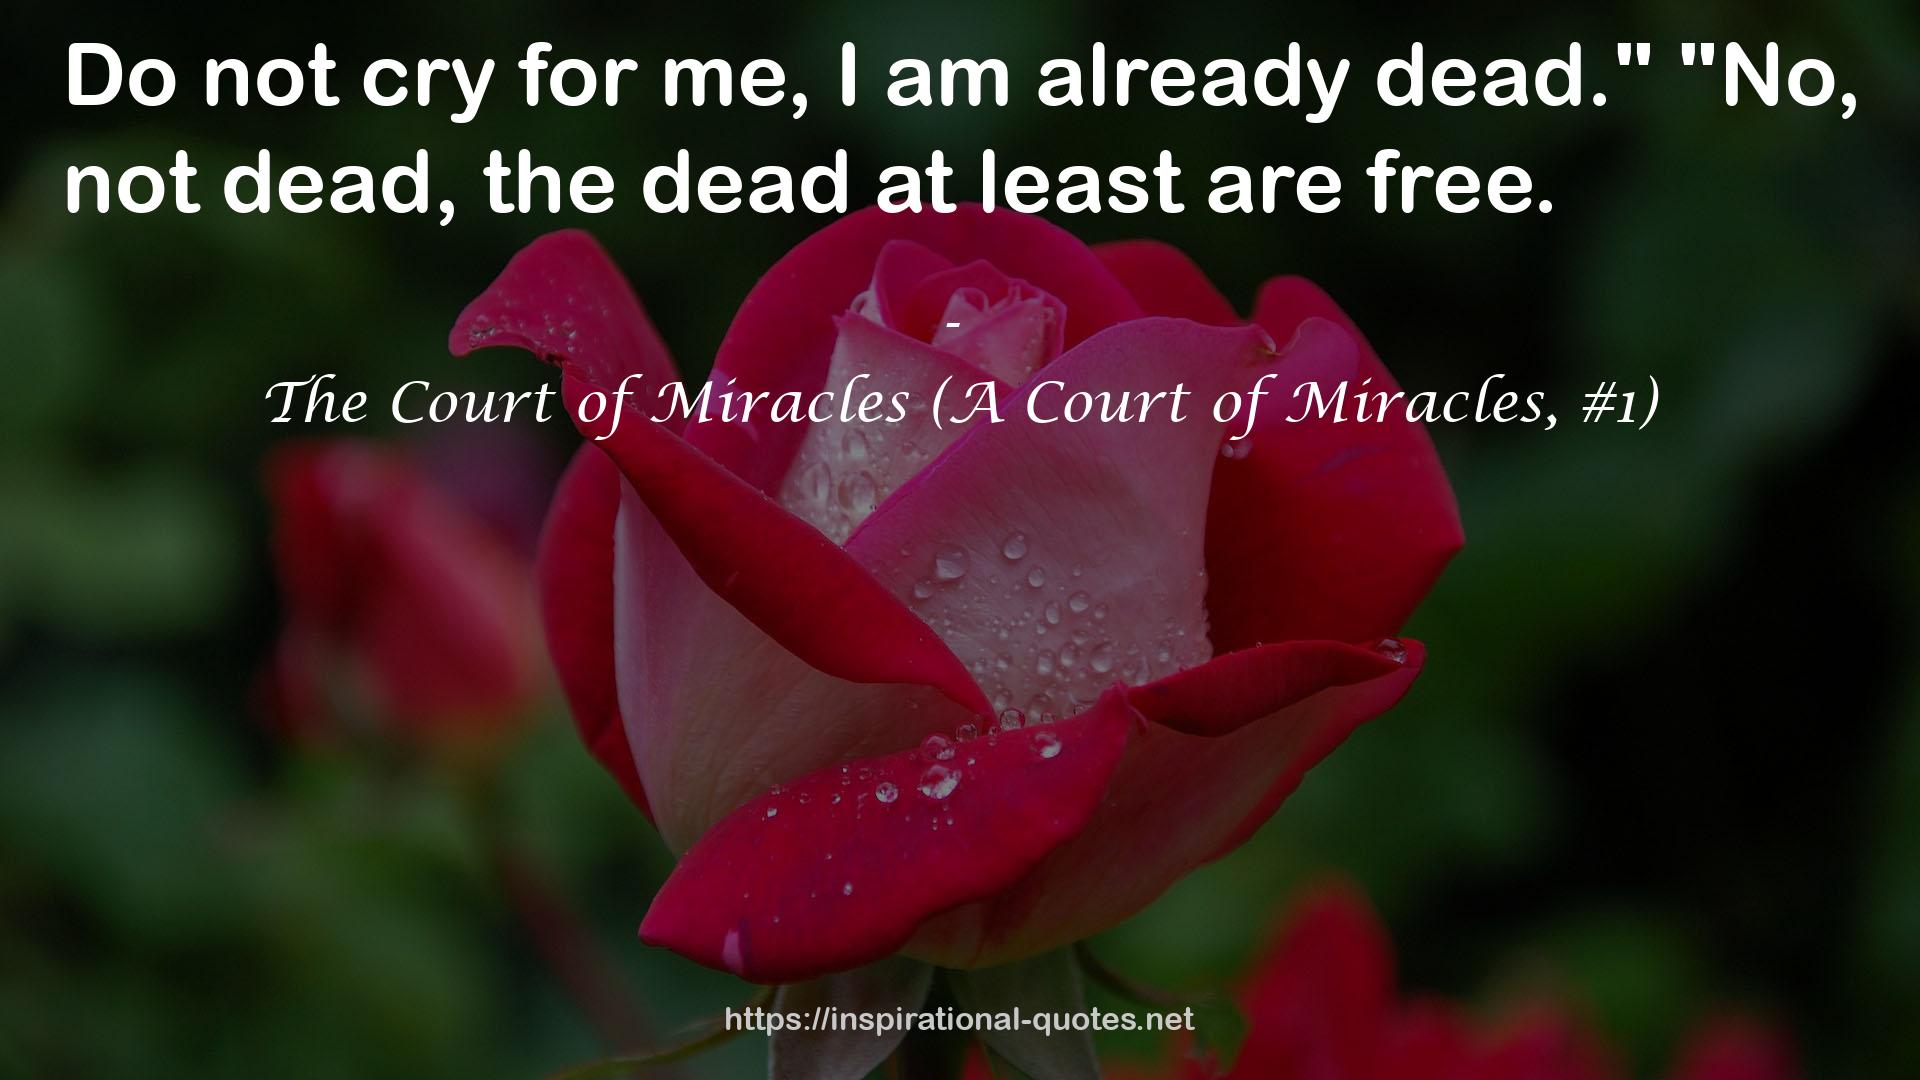 The Court of Miracles (A Court of Miracles, #1) QUOTES